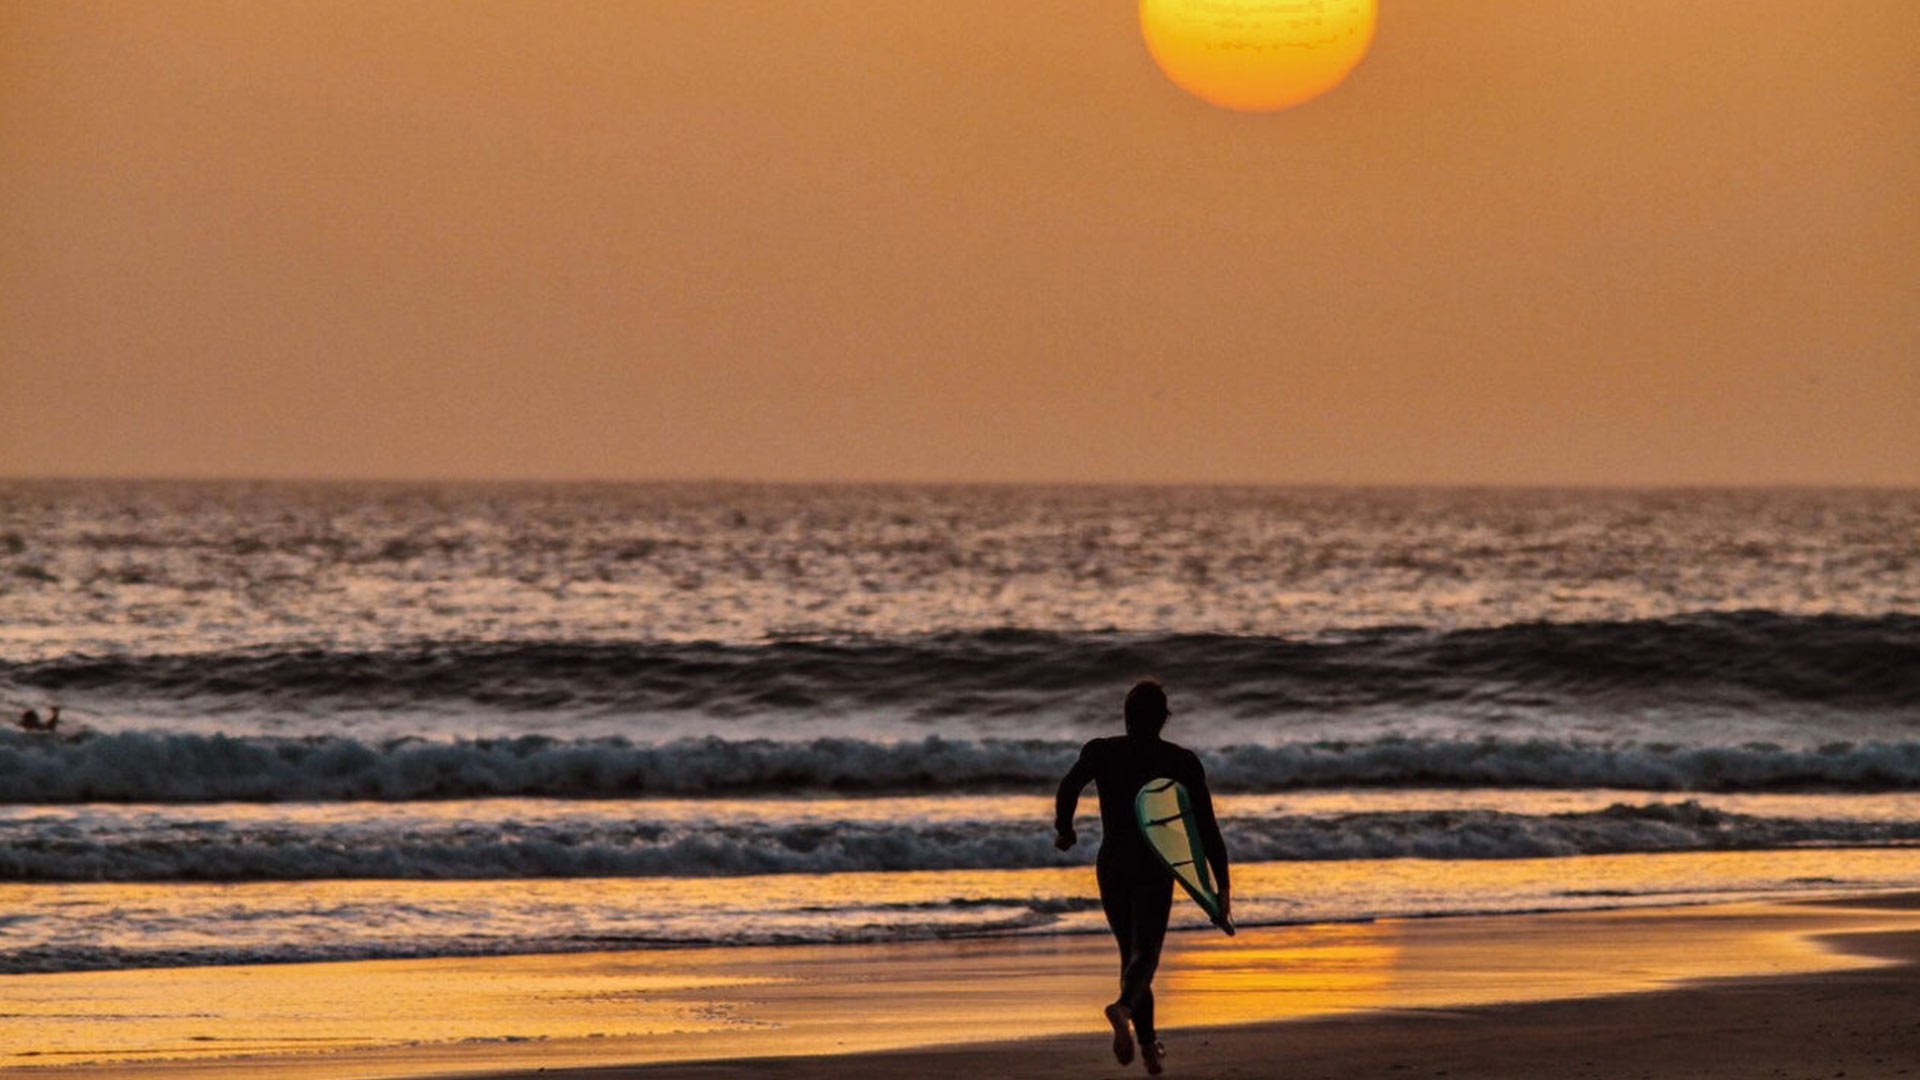 During the sunset a surfer runs holding his board on the beach where there is a lot of swell.